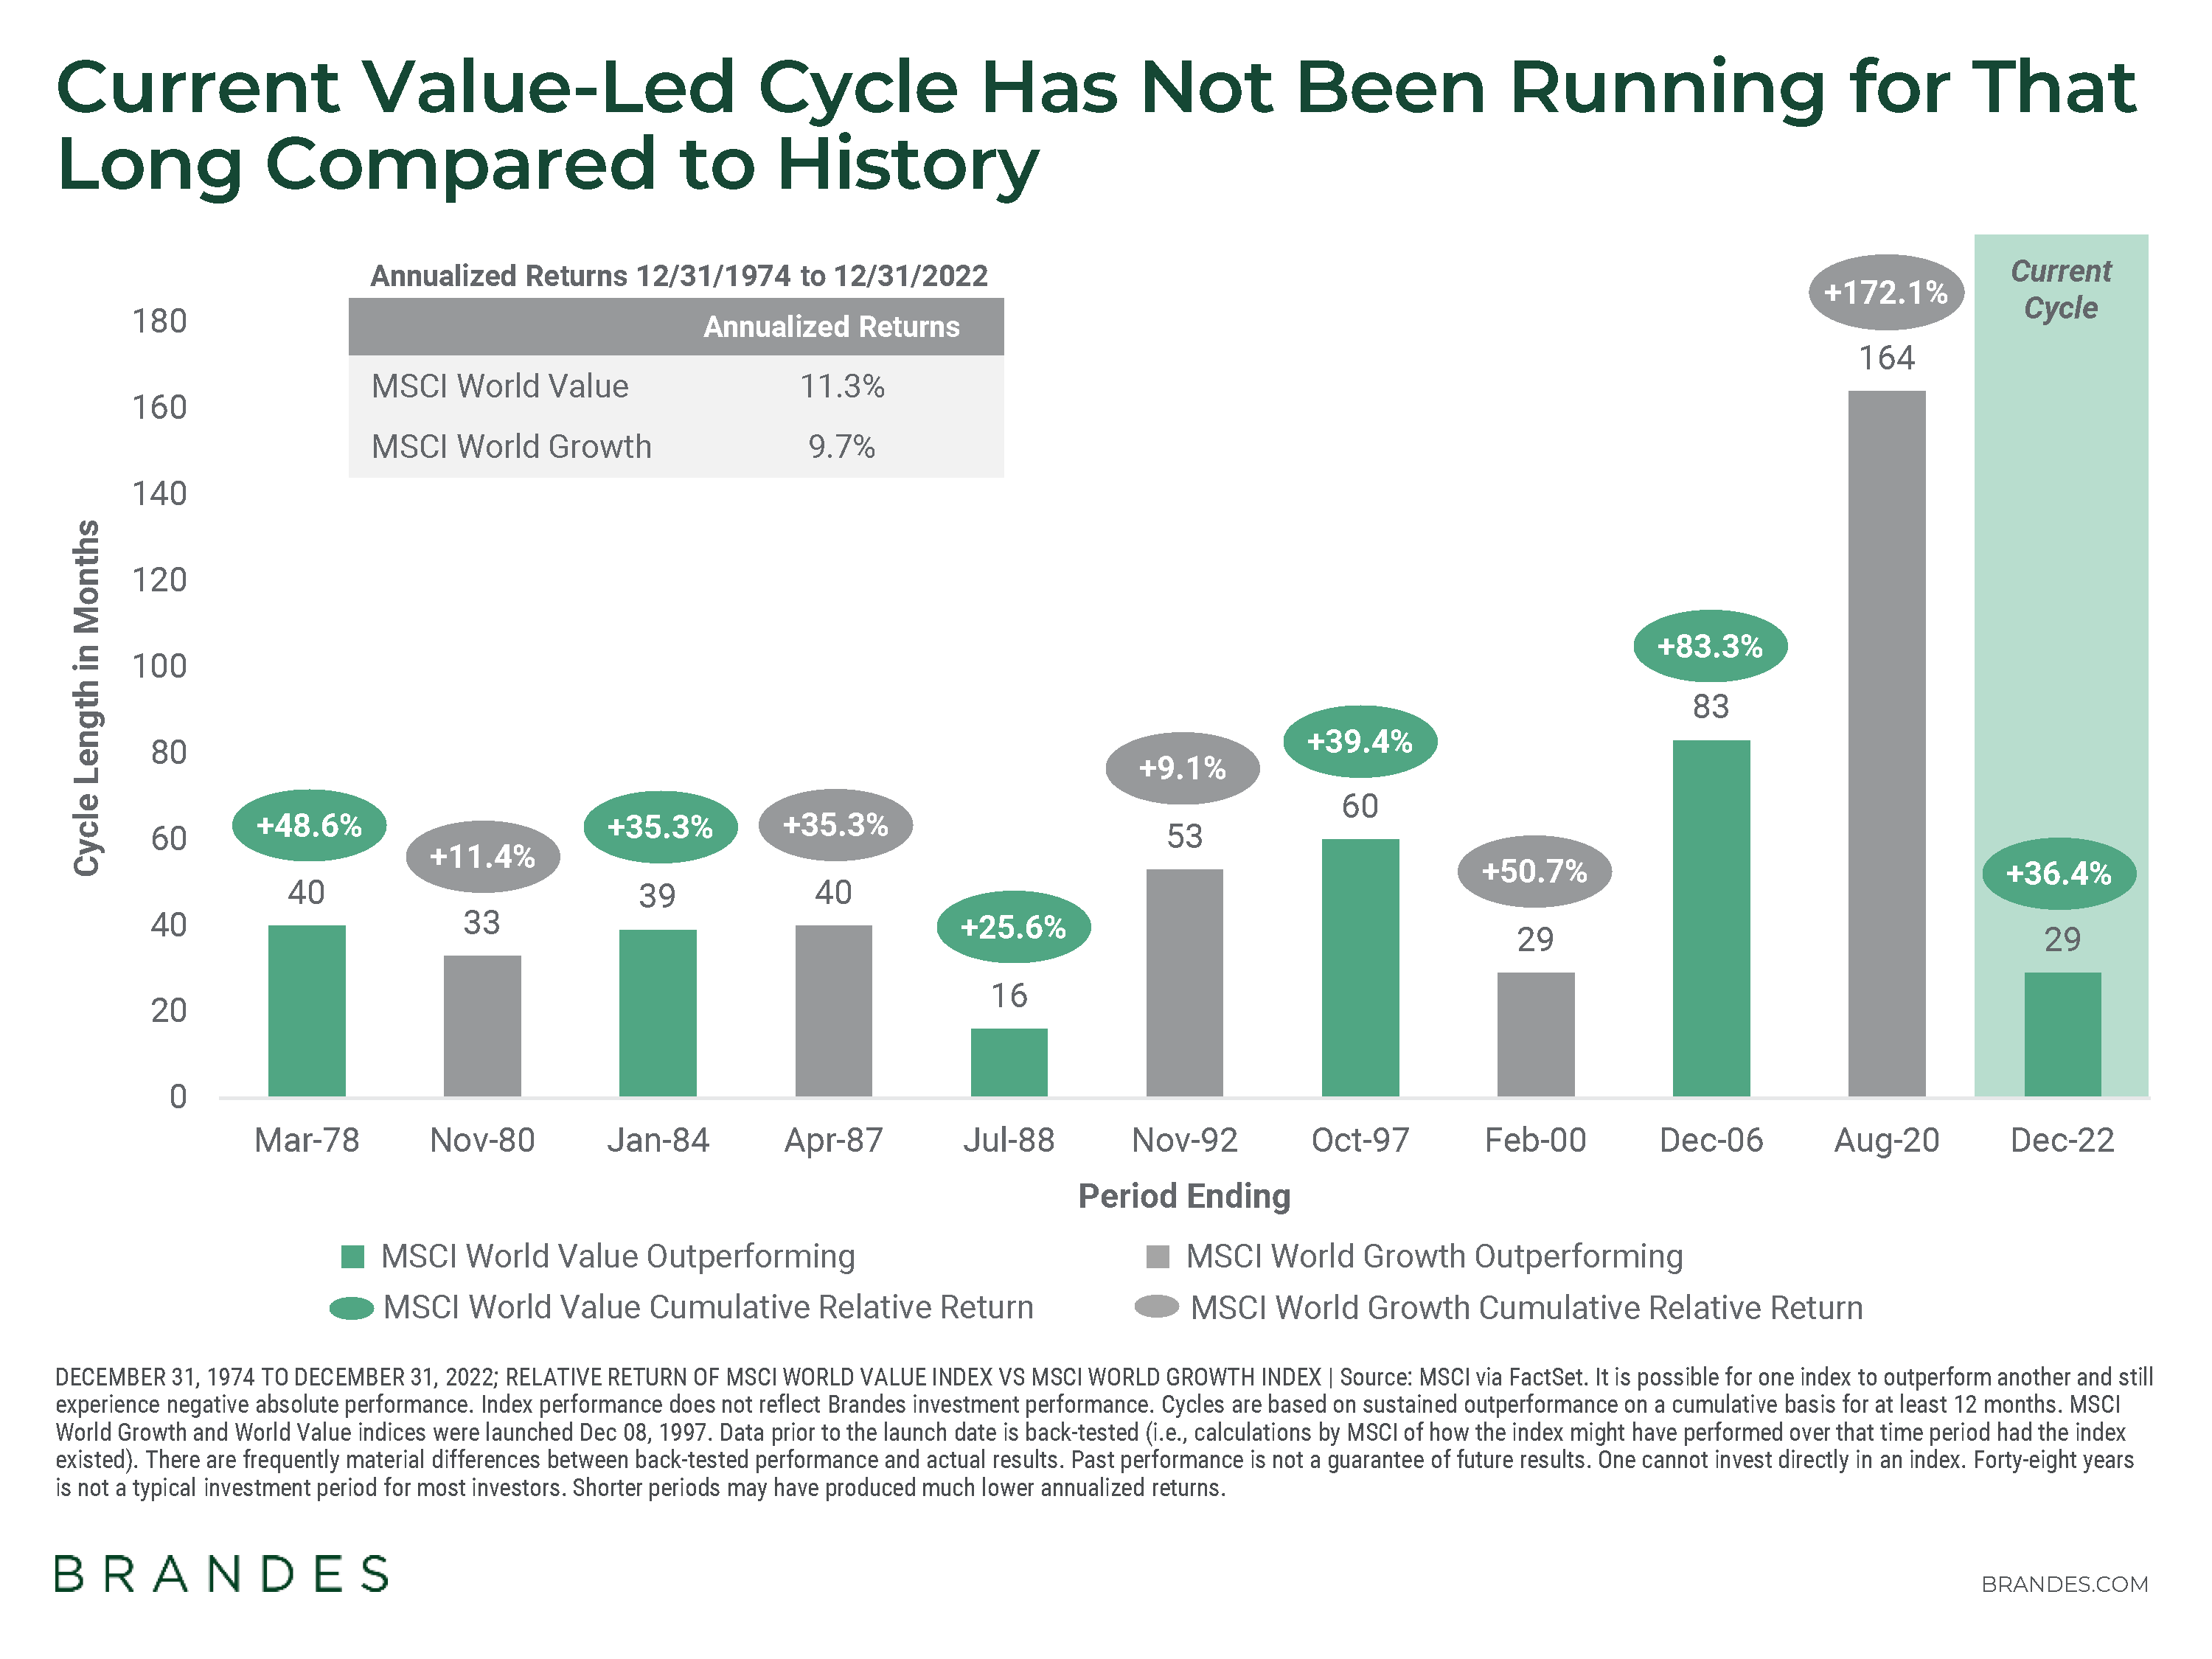 Current Value-Led Cycle Has Not Been Running for That Long Compared to History